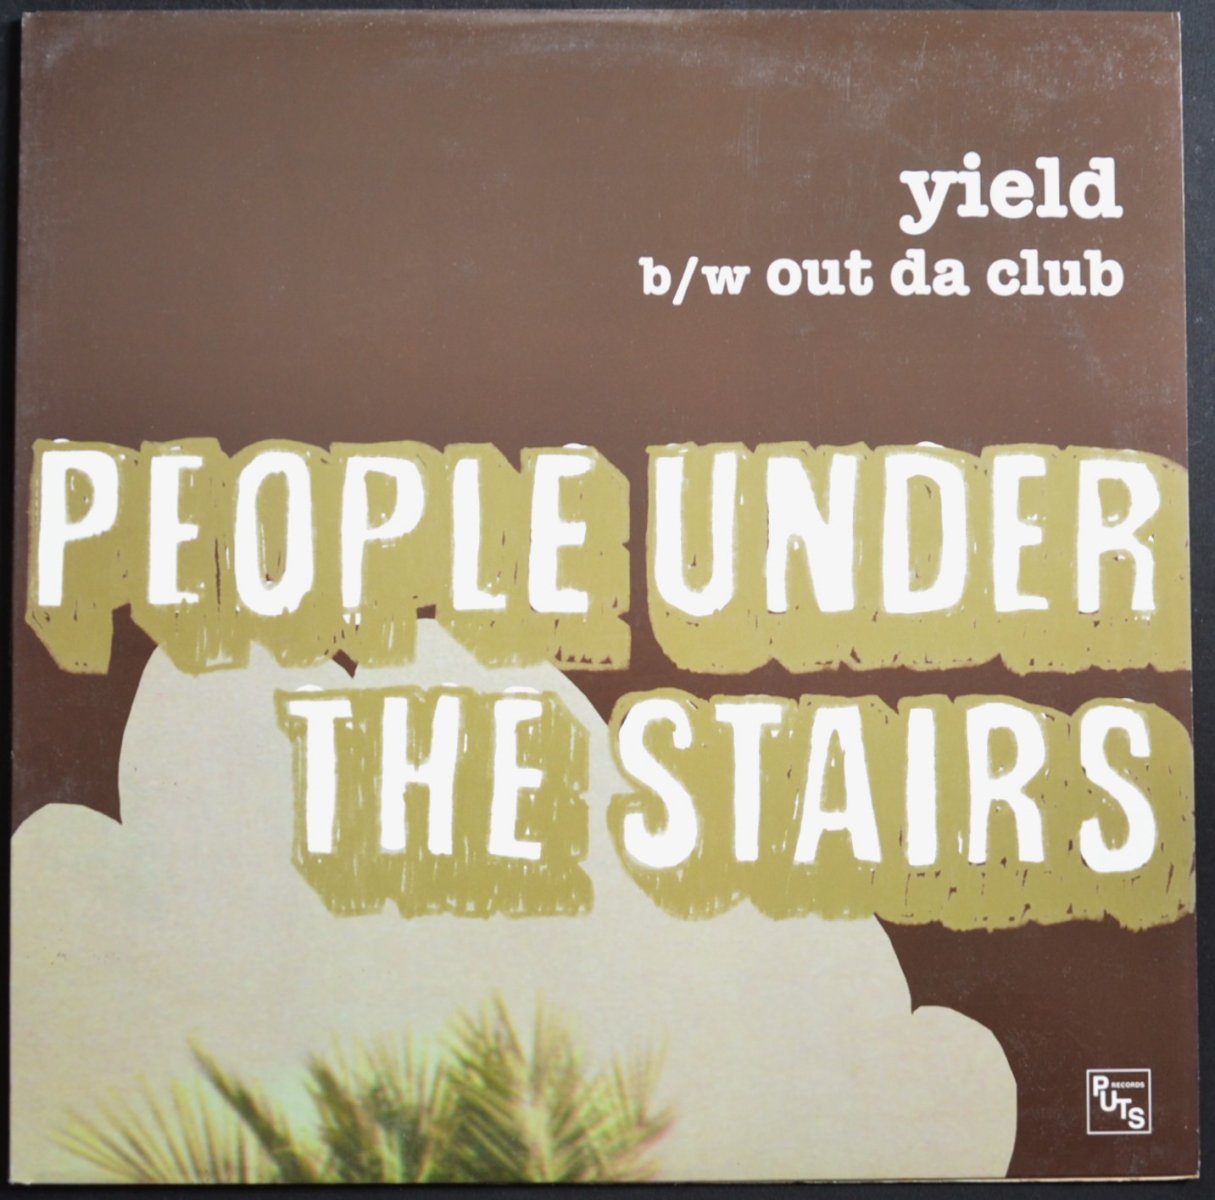 PEOPLE UNDER THE STAIRS / YIELD / OUT DA CLUB (12